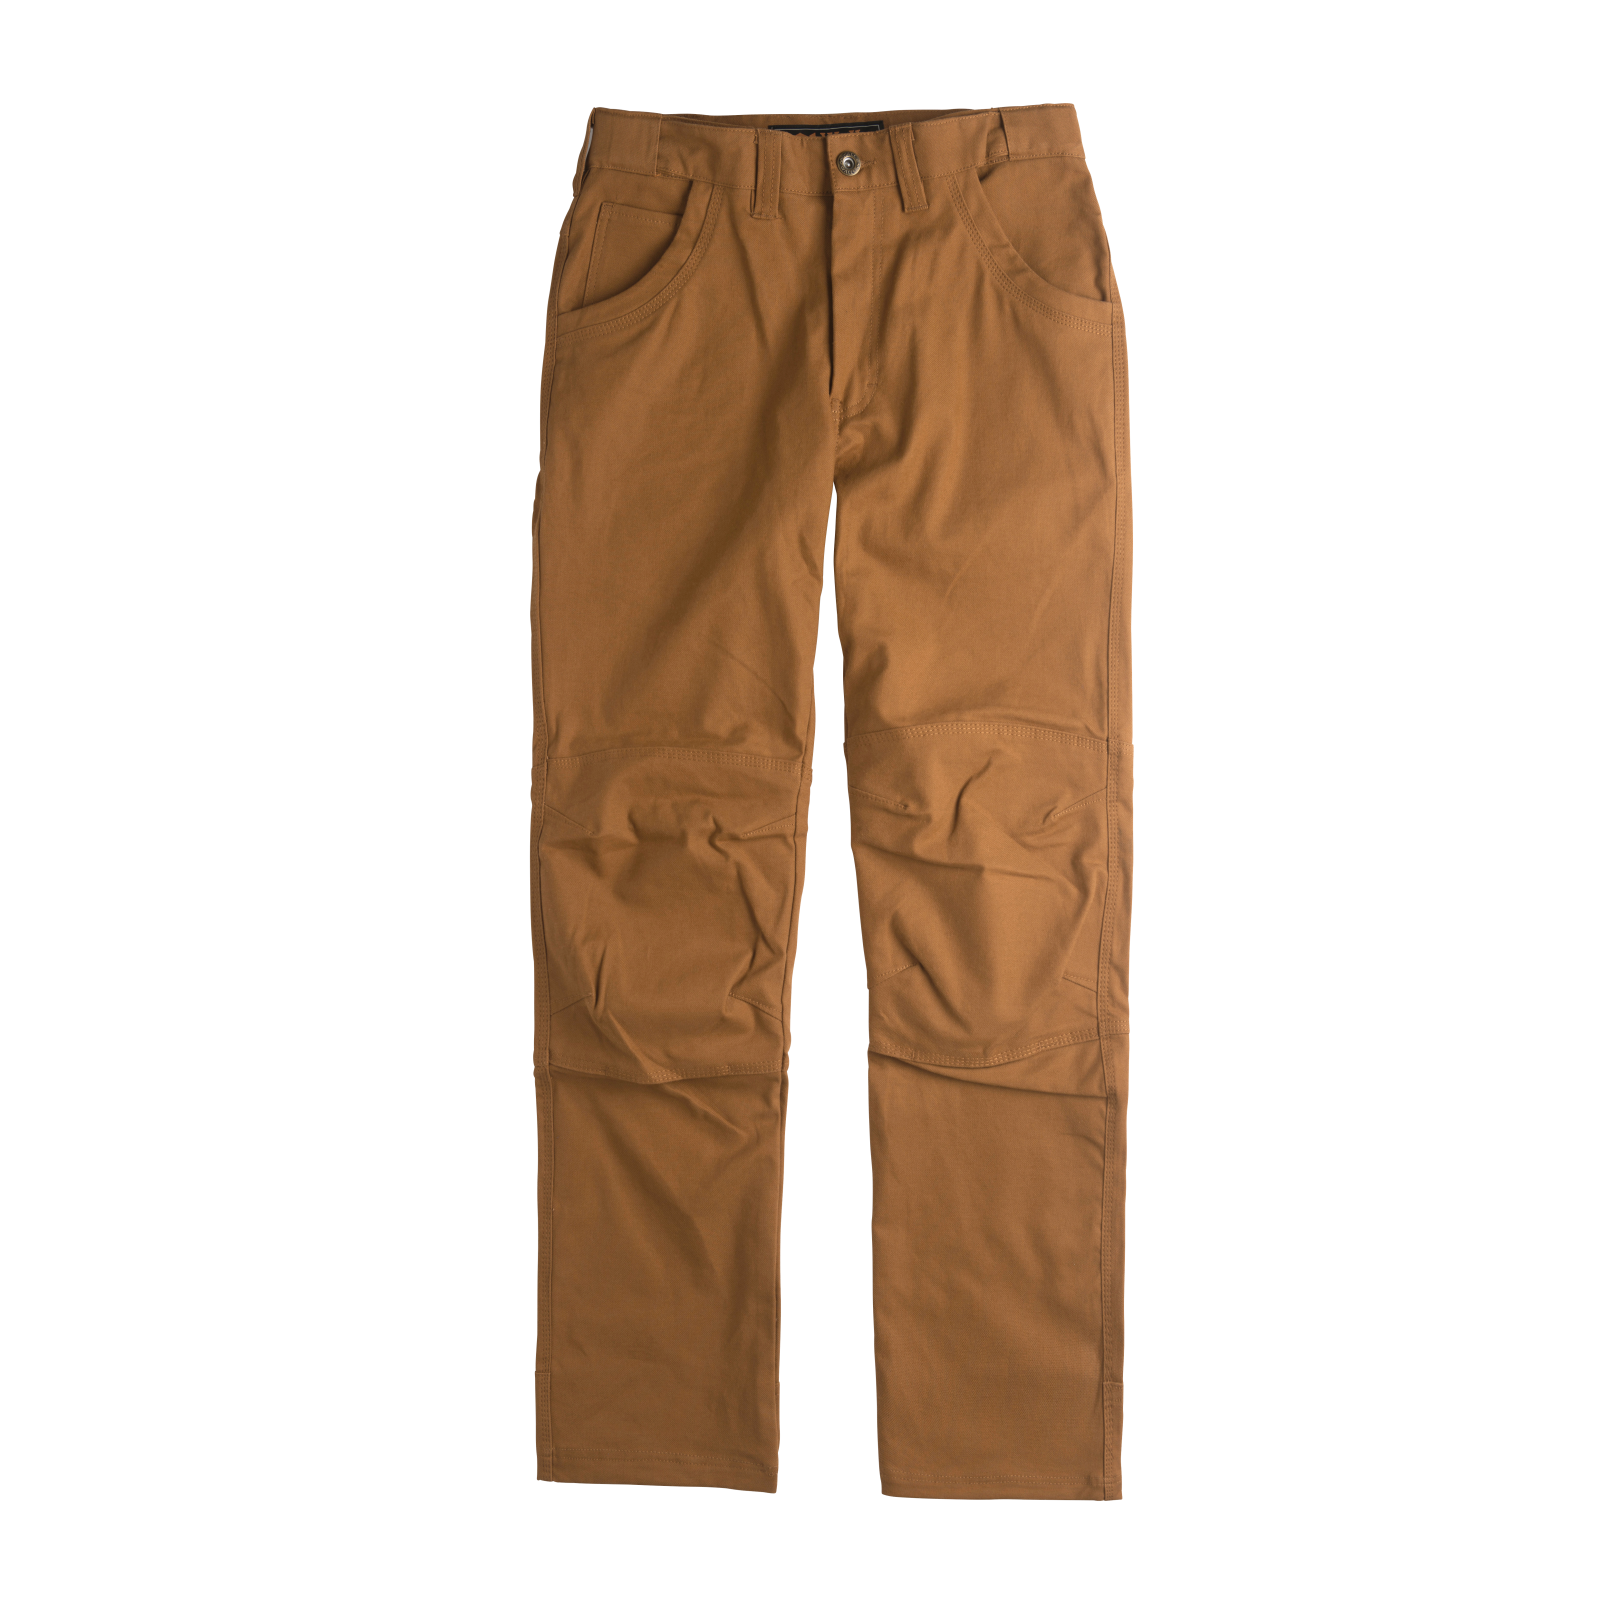 Ditchdigger Pro Double-Knee DWR Stretch Duck Work Pants | Walls®